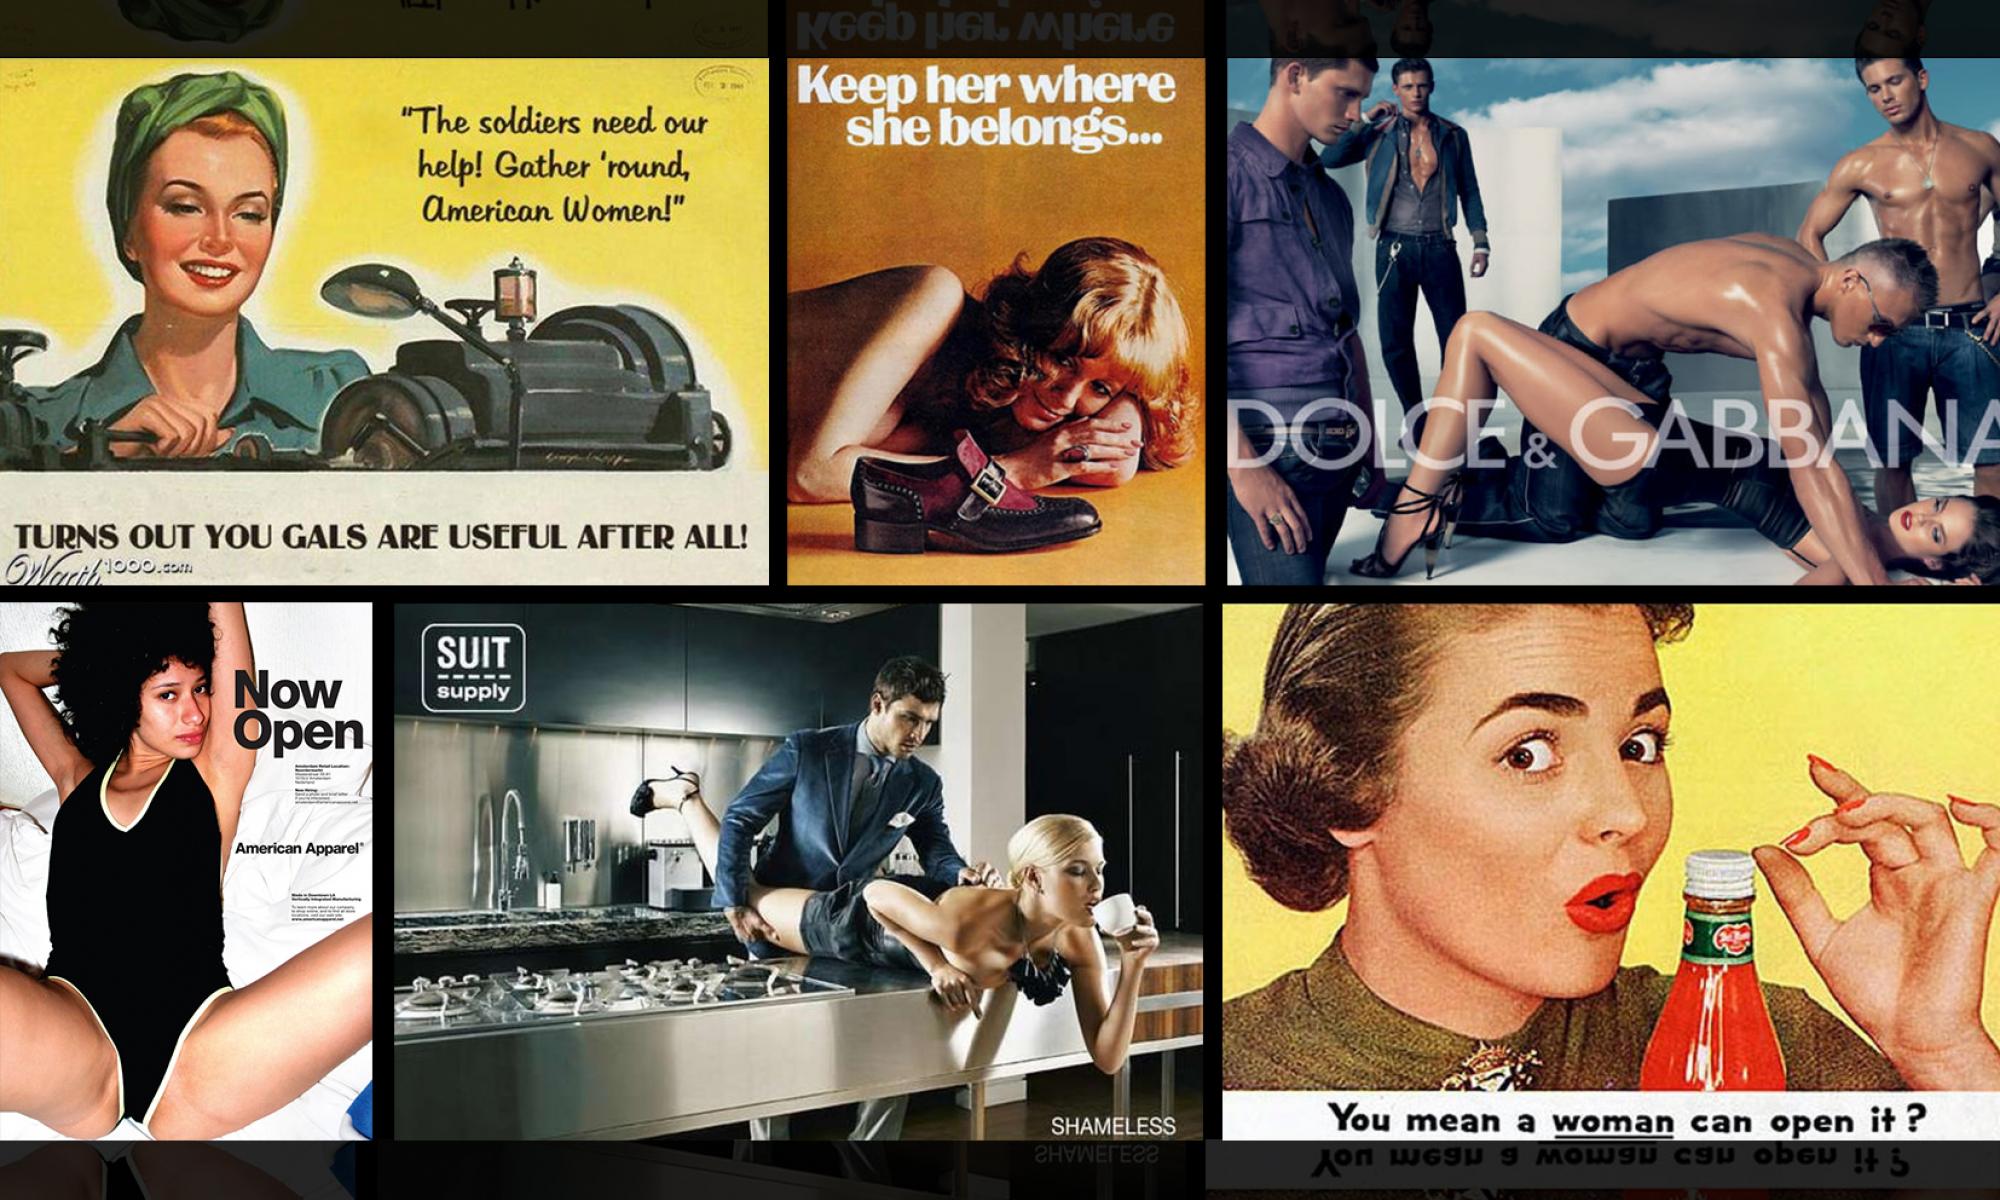 Sexism in advertising The Lovepost photo